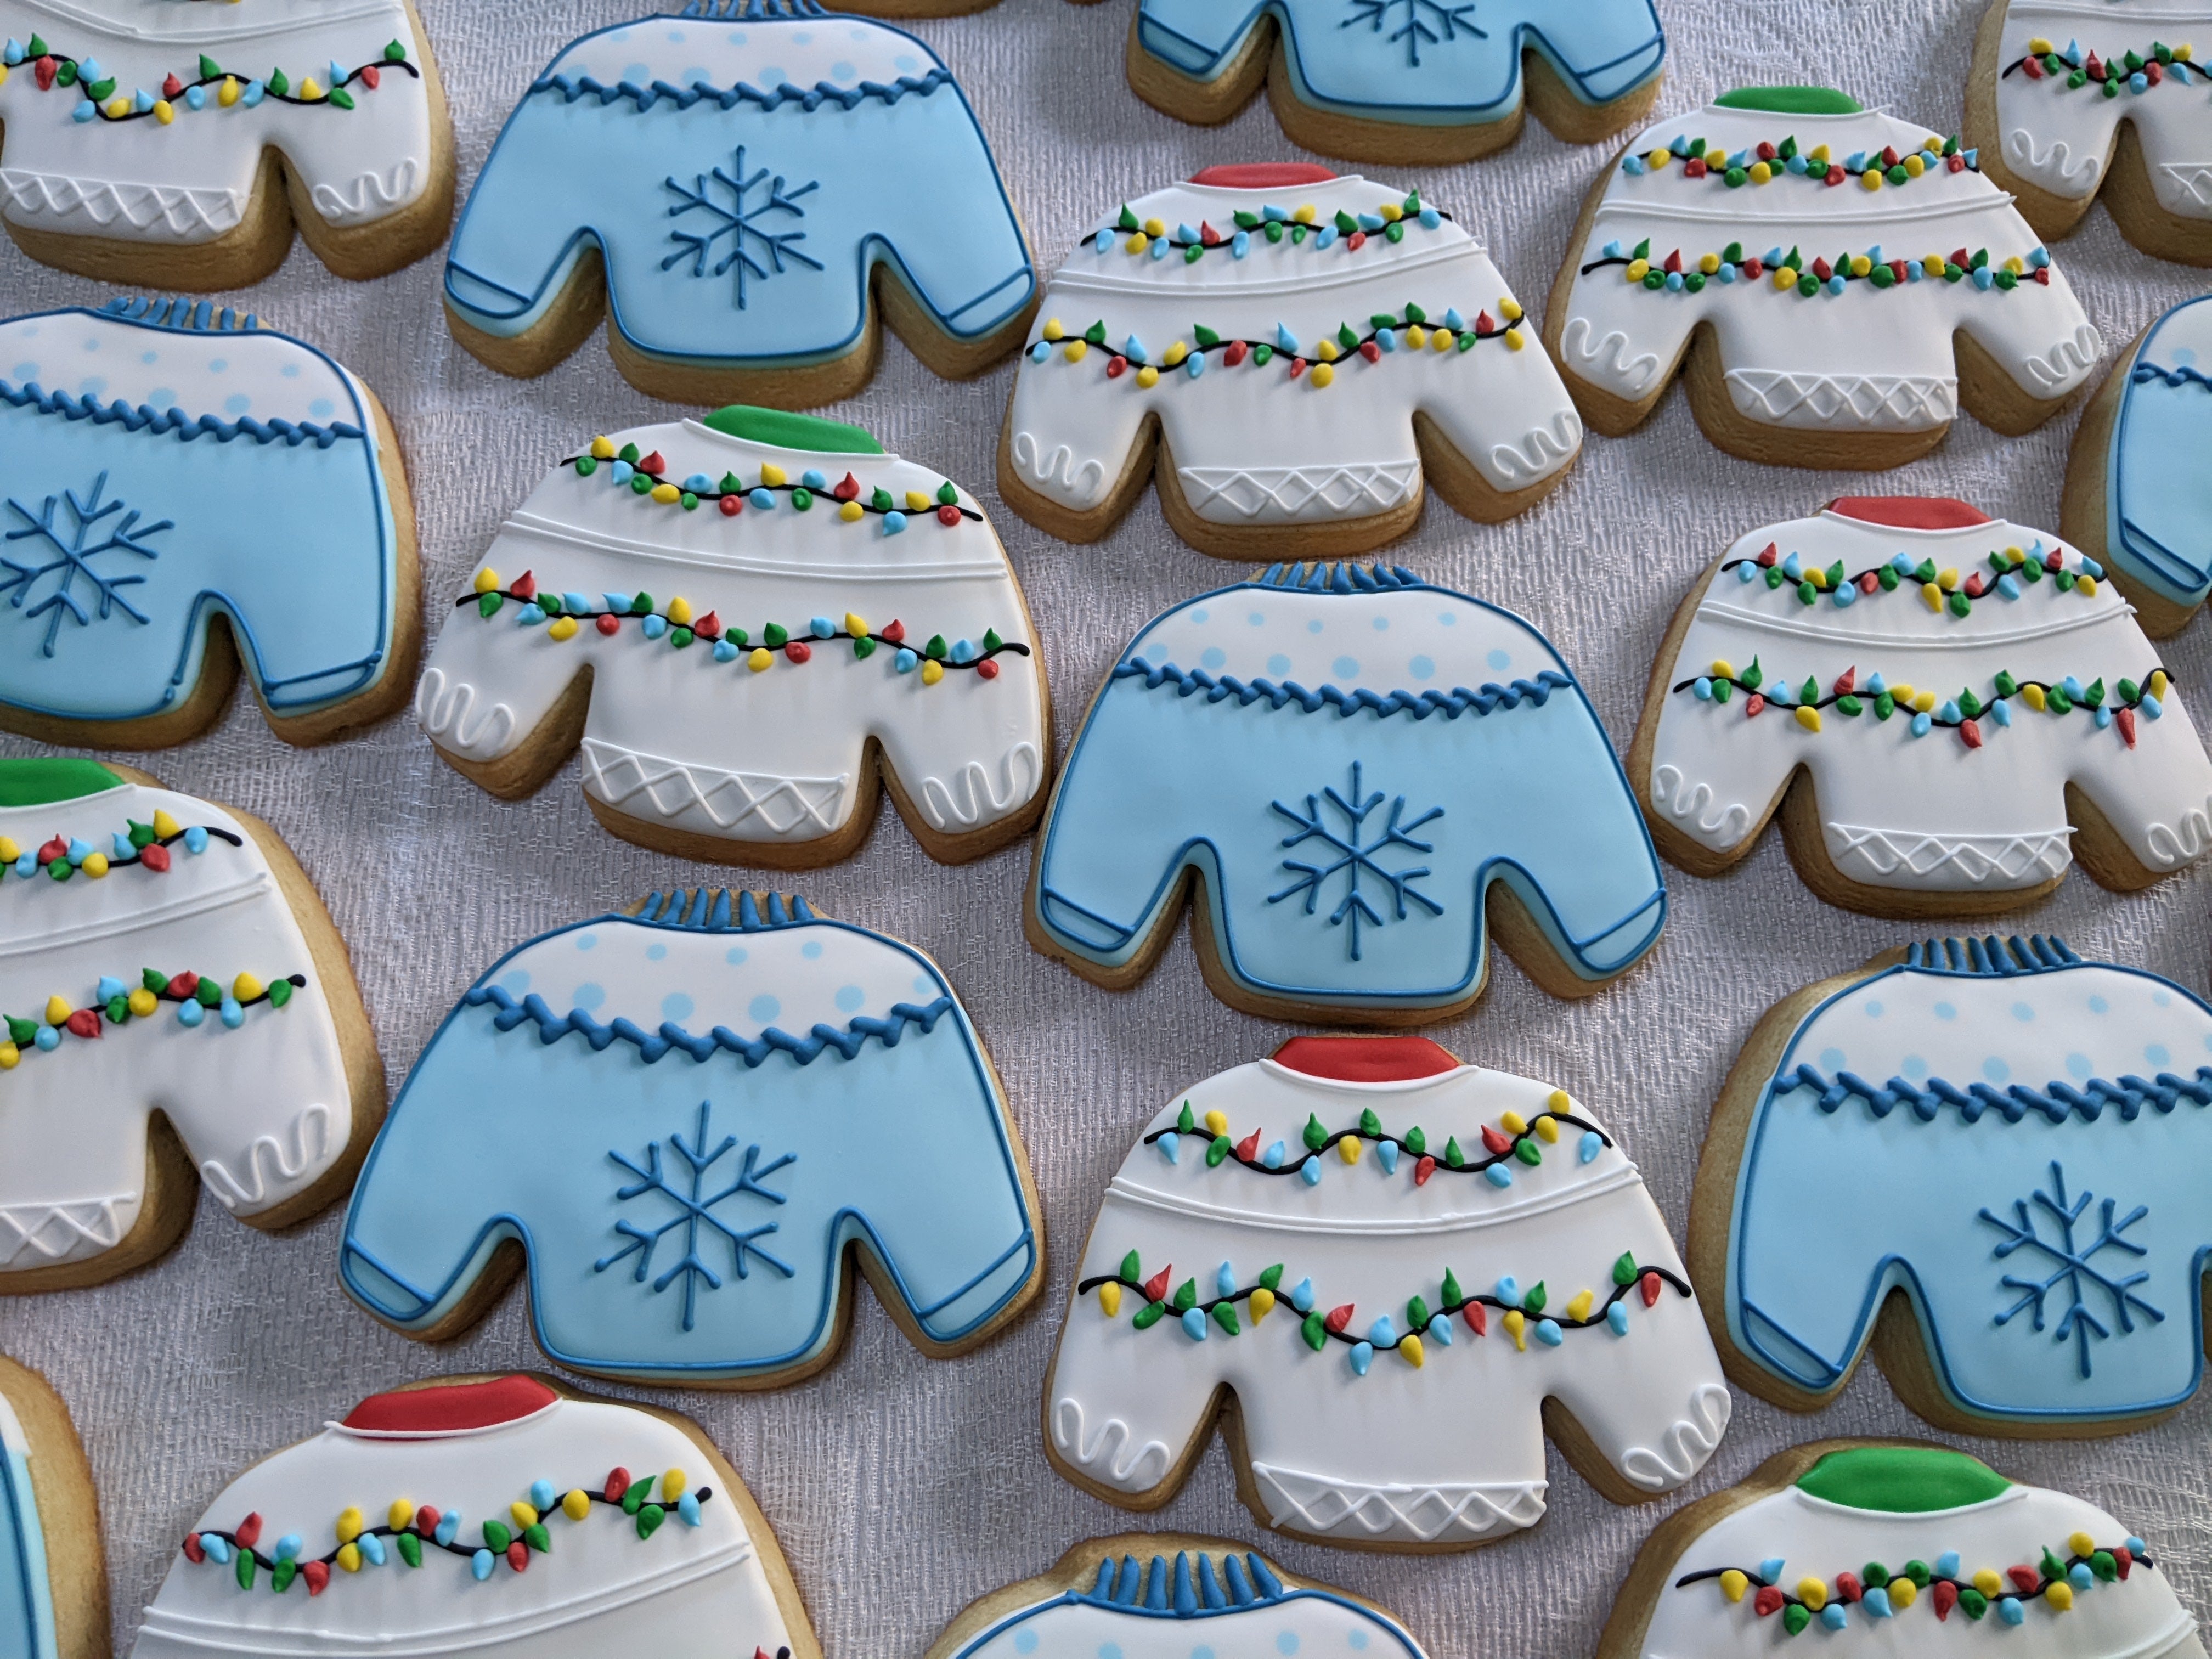 Ugly Christmas Sweaters 24 decorated cookies